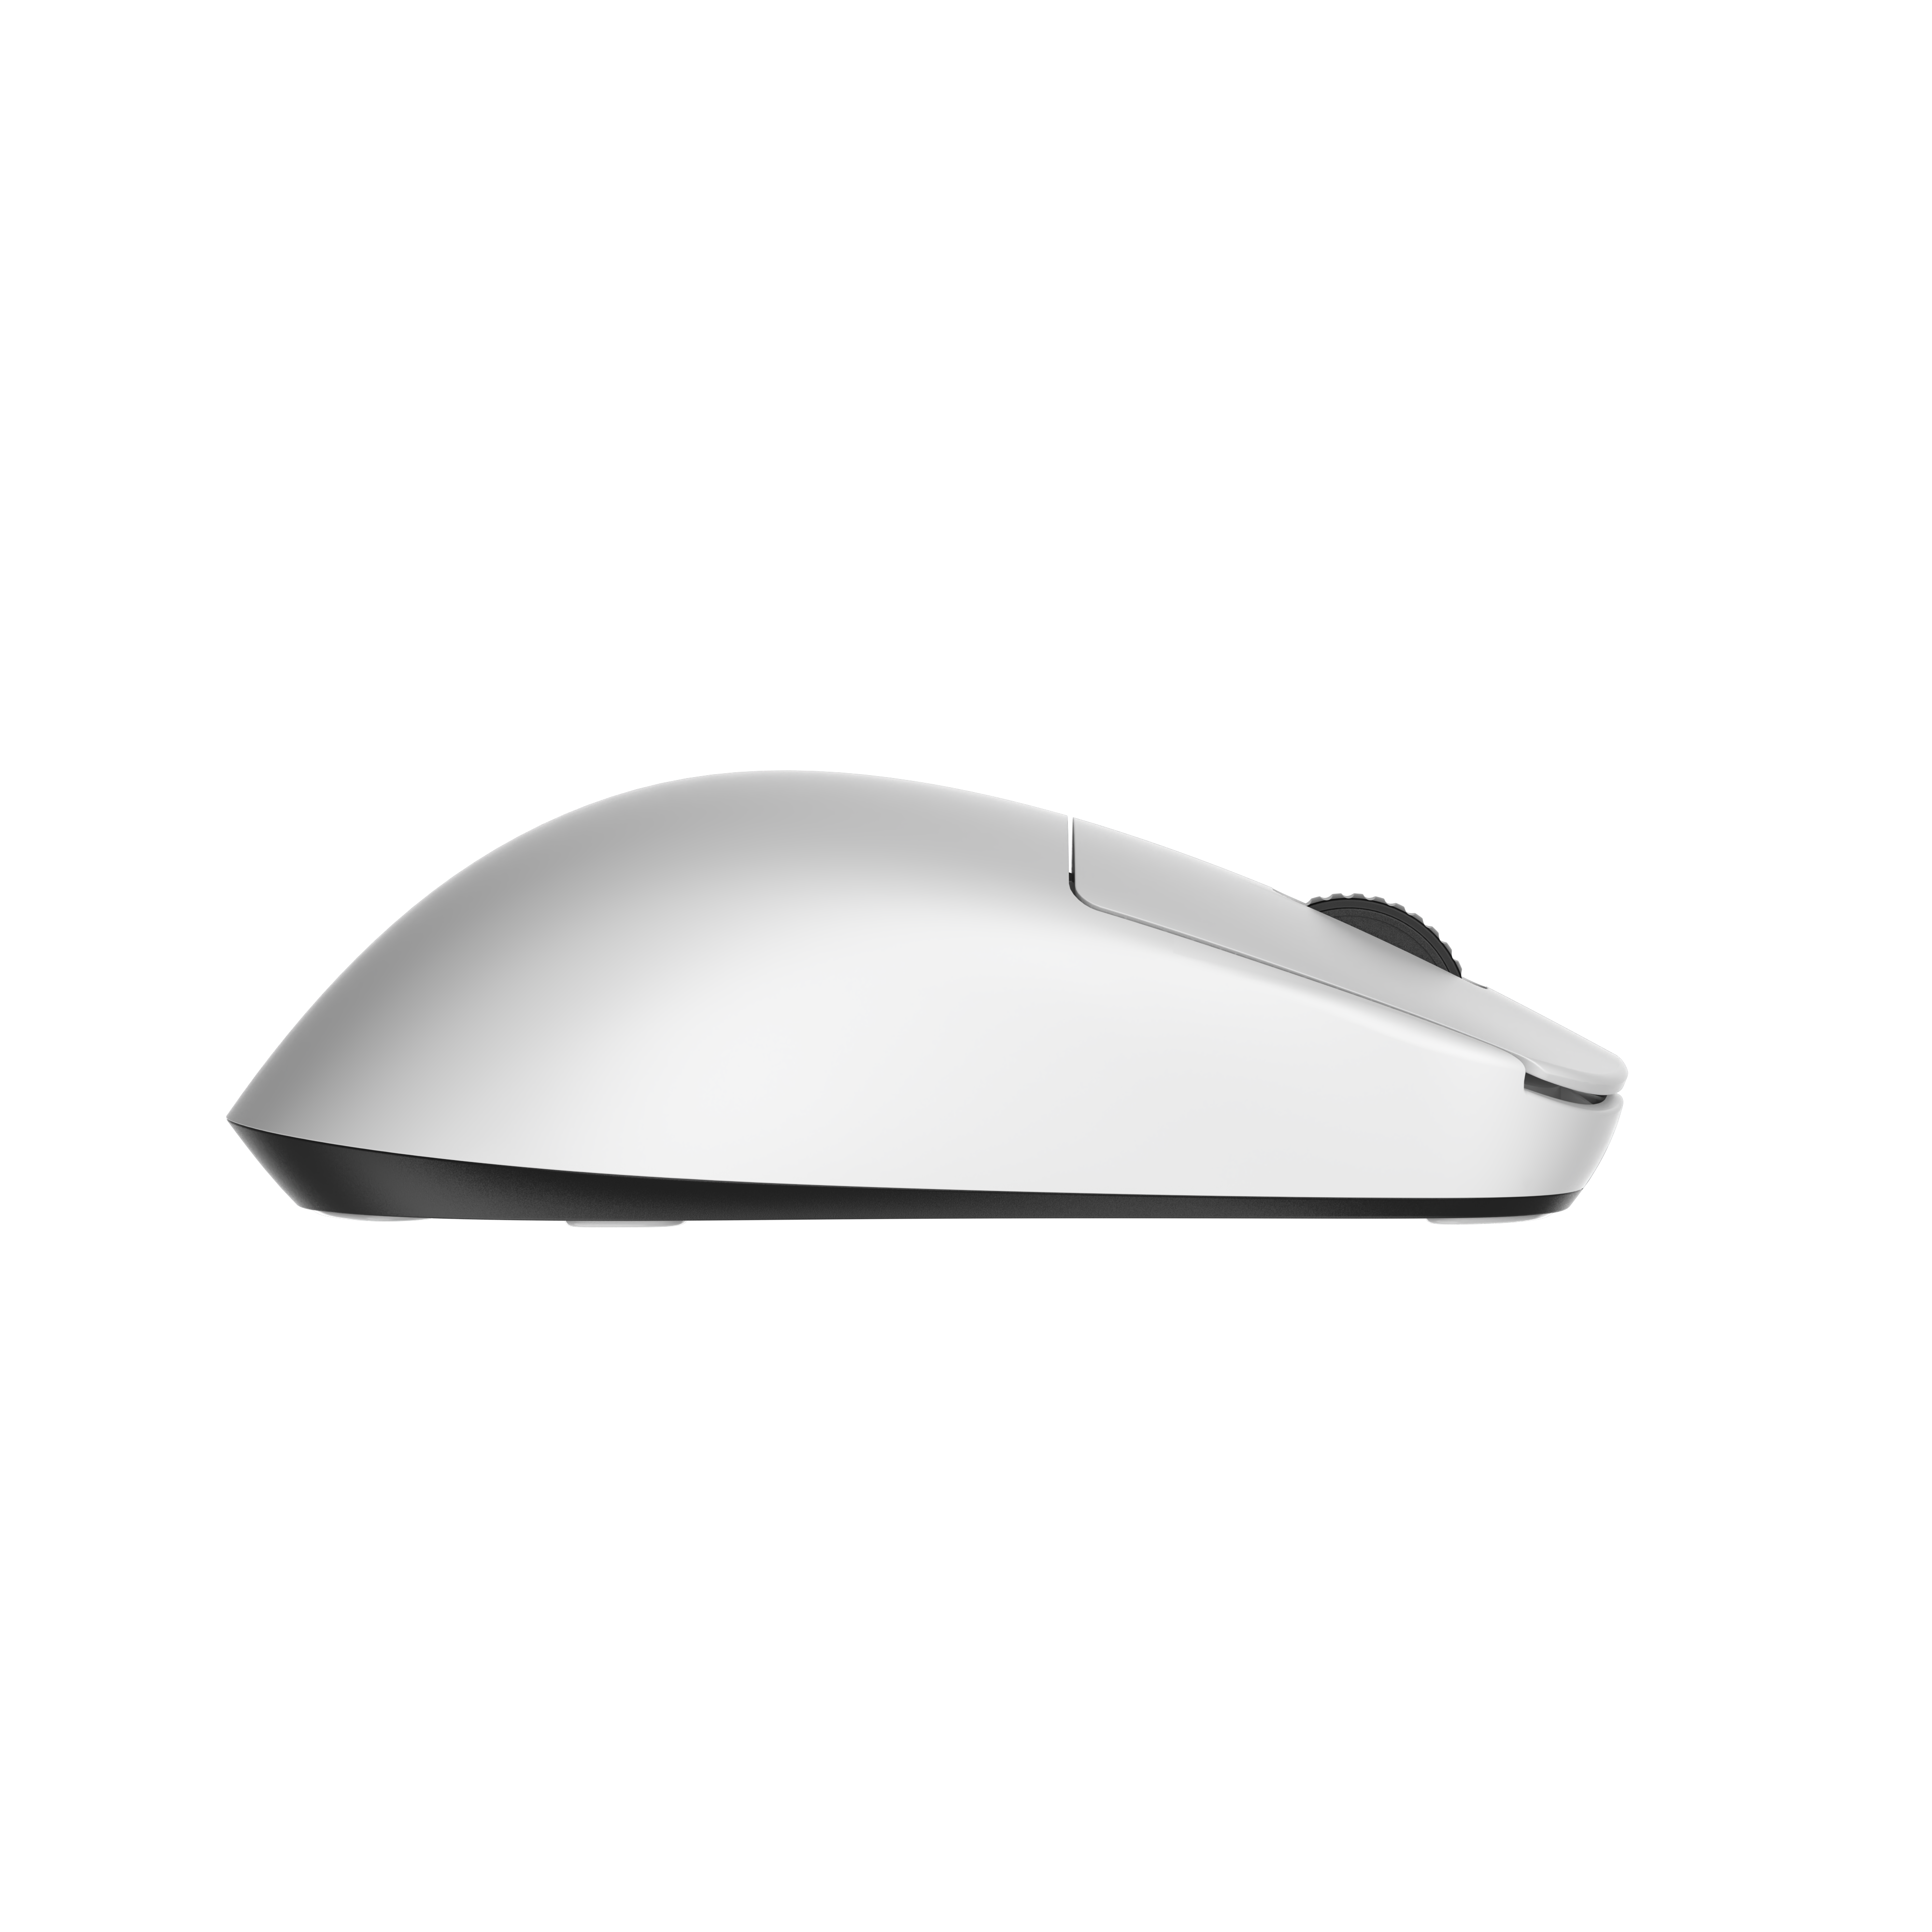 OP1we Gaming Mouse - White